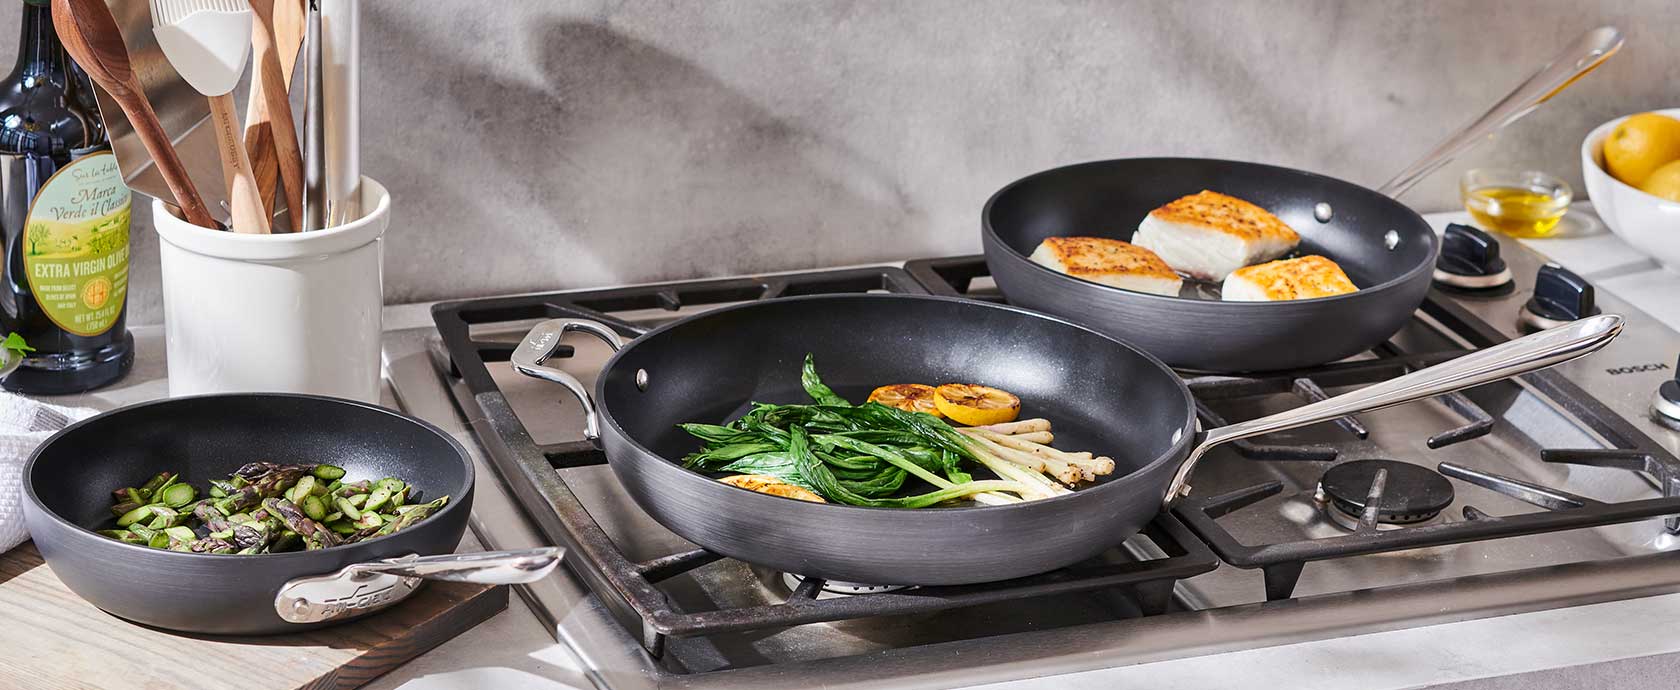 All-Clad set of three nonstick skillets on cooktop